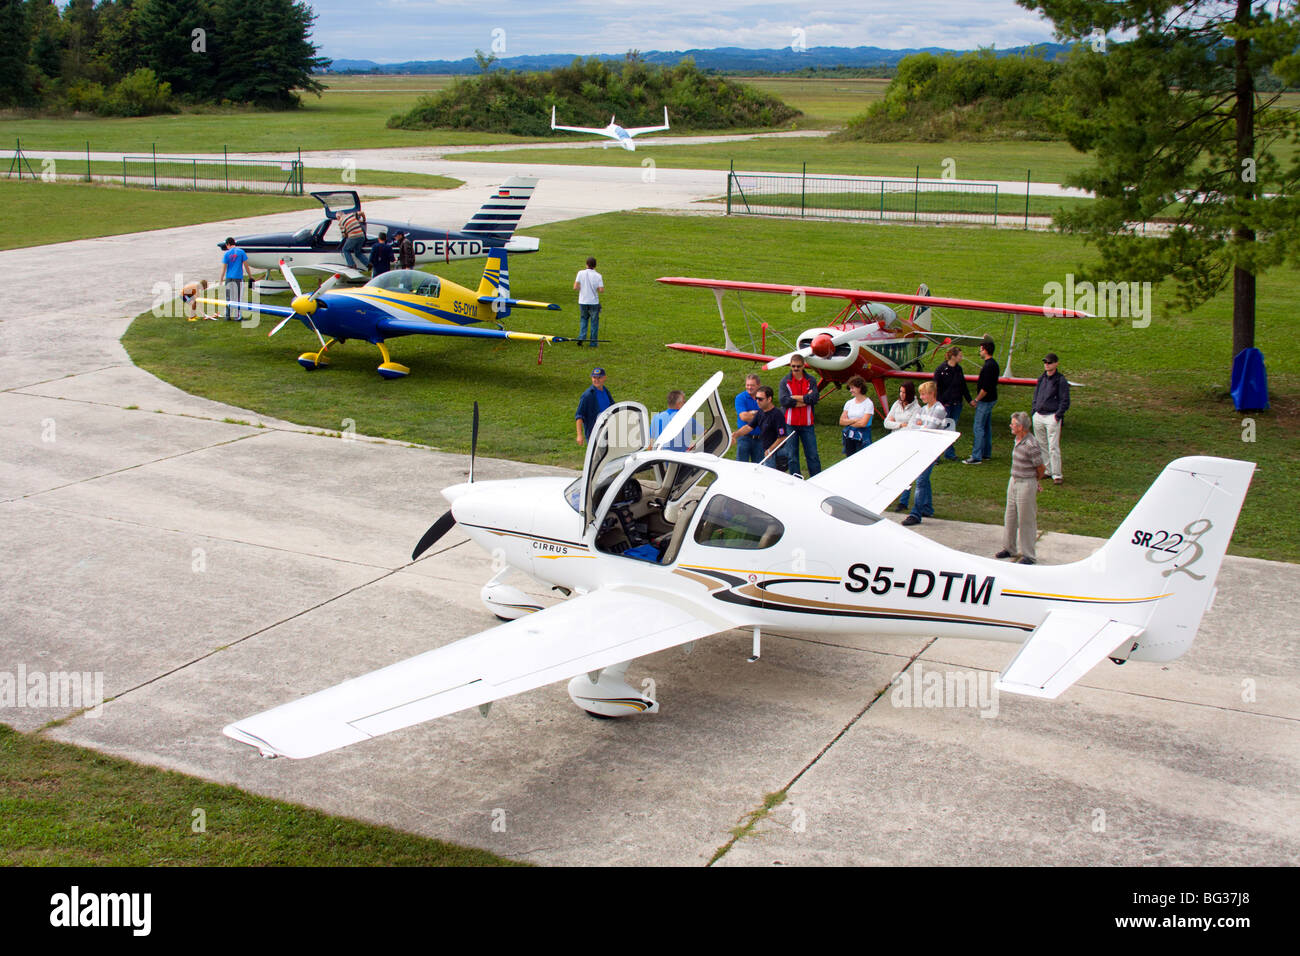 View at the small airport with few light aircrafts and spectators. Stock Photo